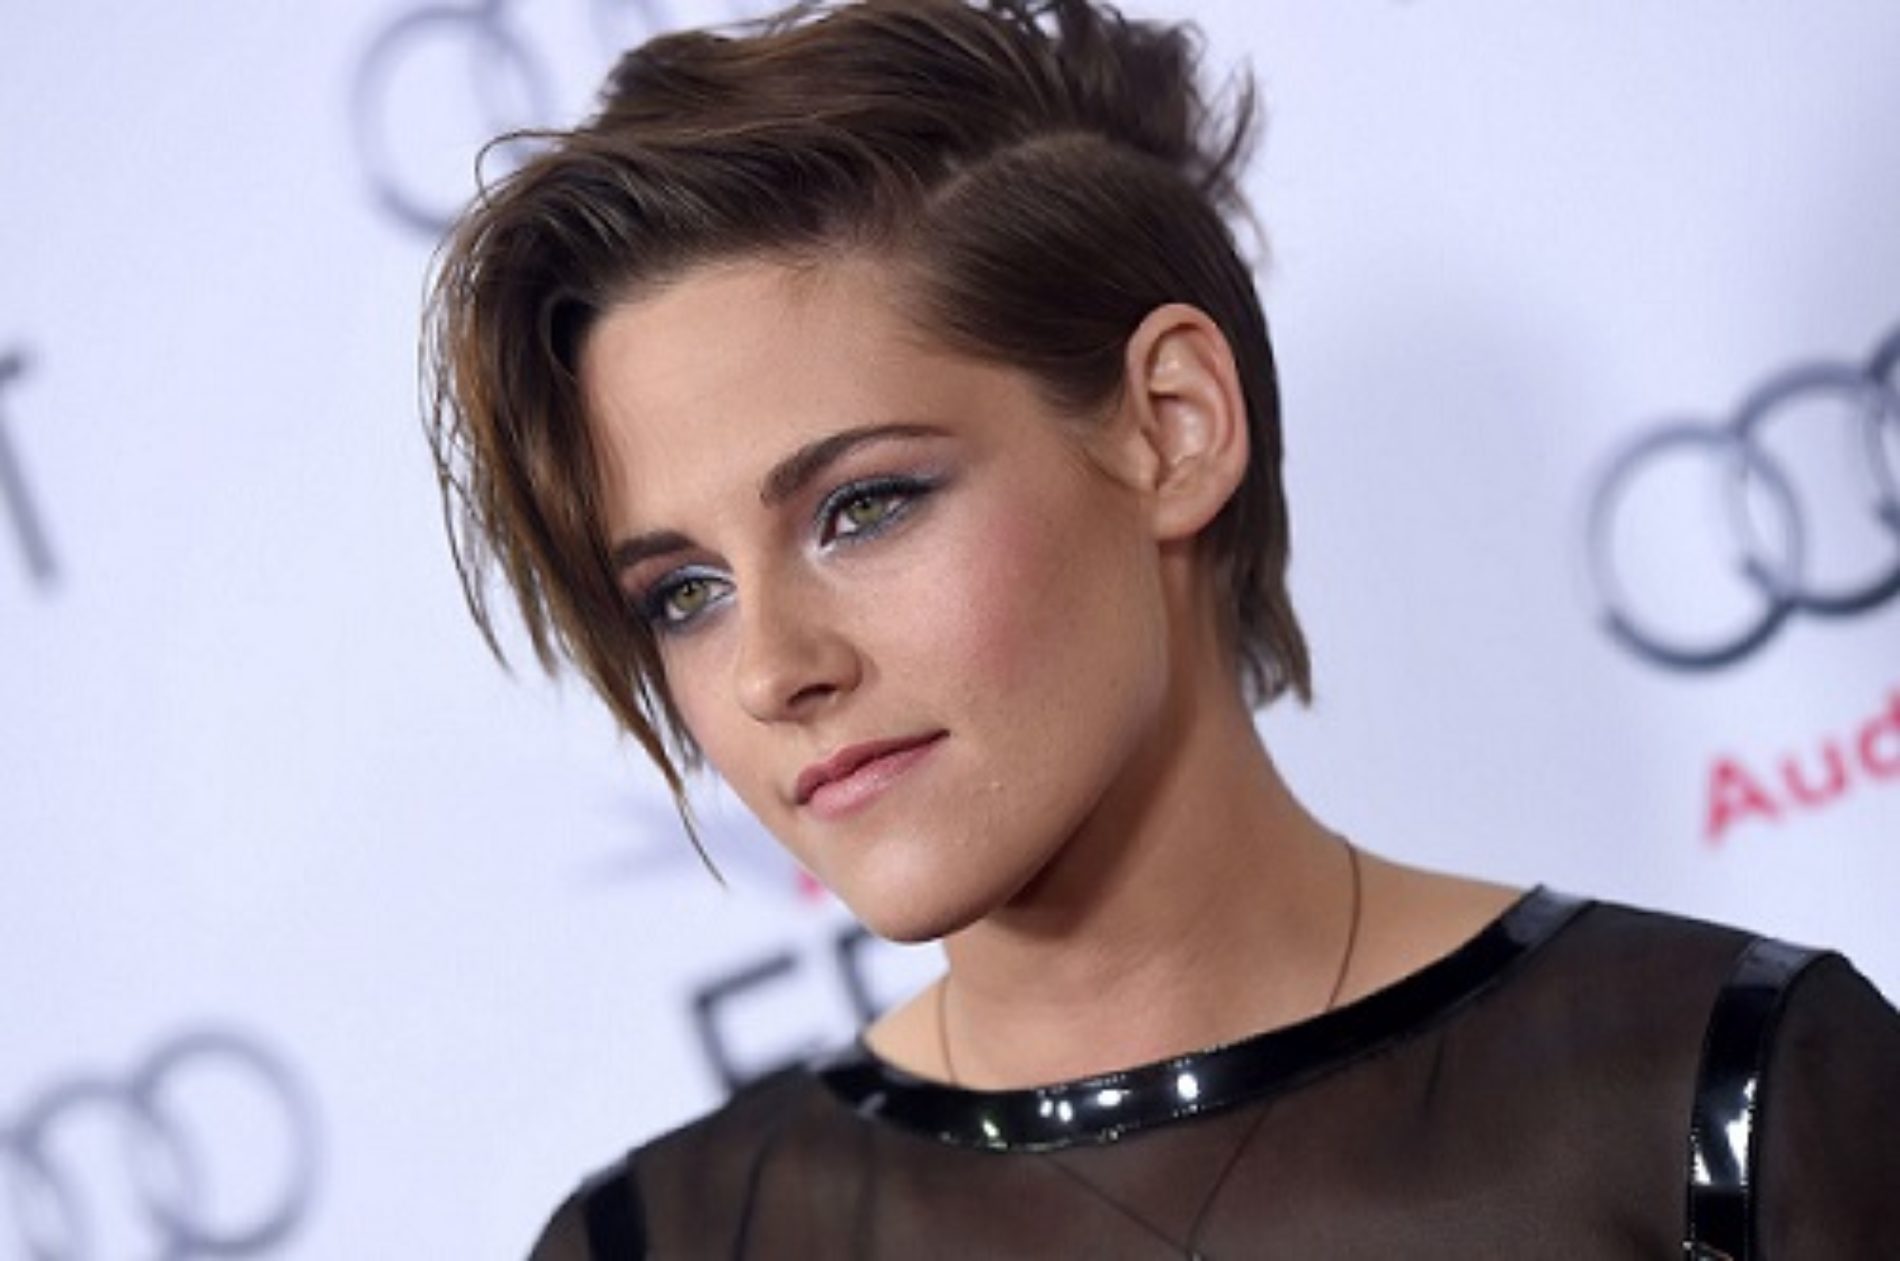 Kristen Stewart’s mum says she didn’t ‘out’ actress to tabloid